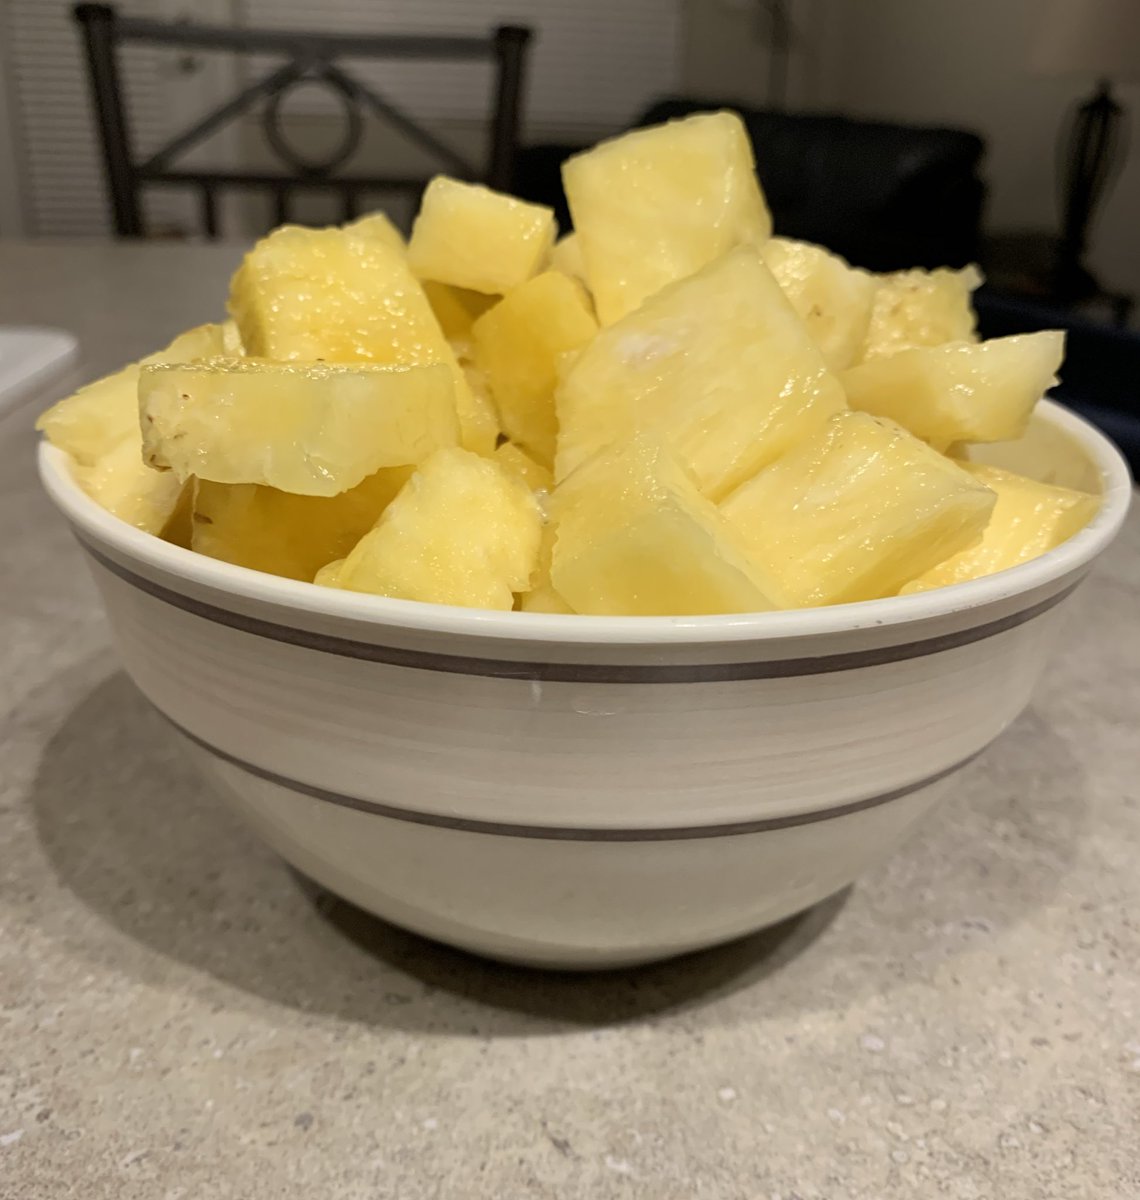 The product that is left is the yield, or the boneless, closely trimmed, retail cuts. Aka the edible product that can actually be purchased and consumed. In this case, our yield is a bowl of pineapple. For a beef animal it would be in the form of steaks and roasts.